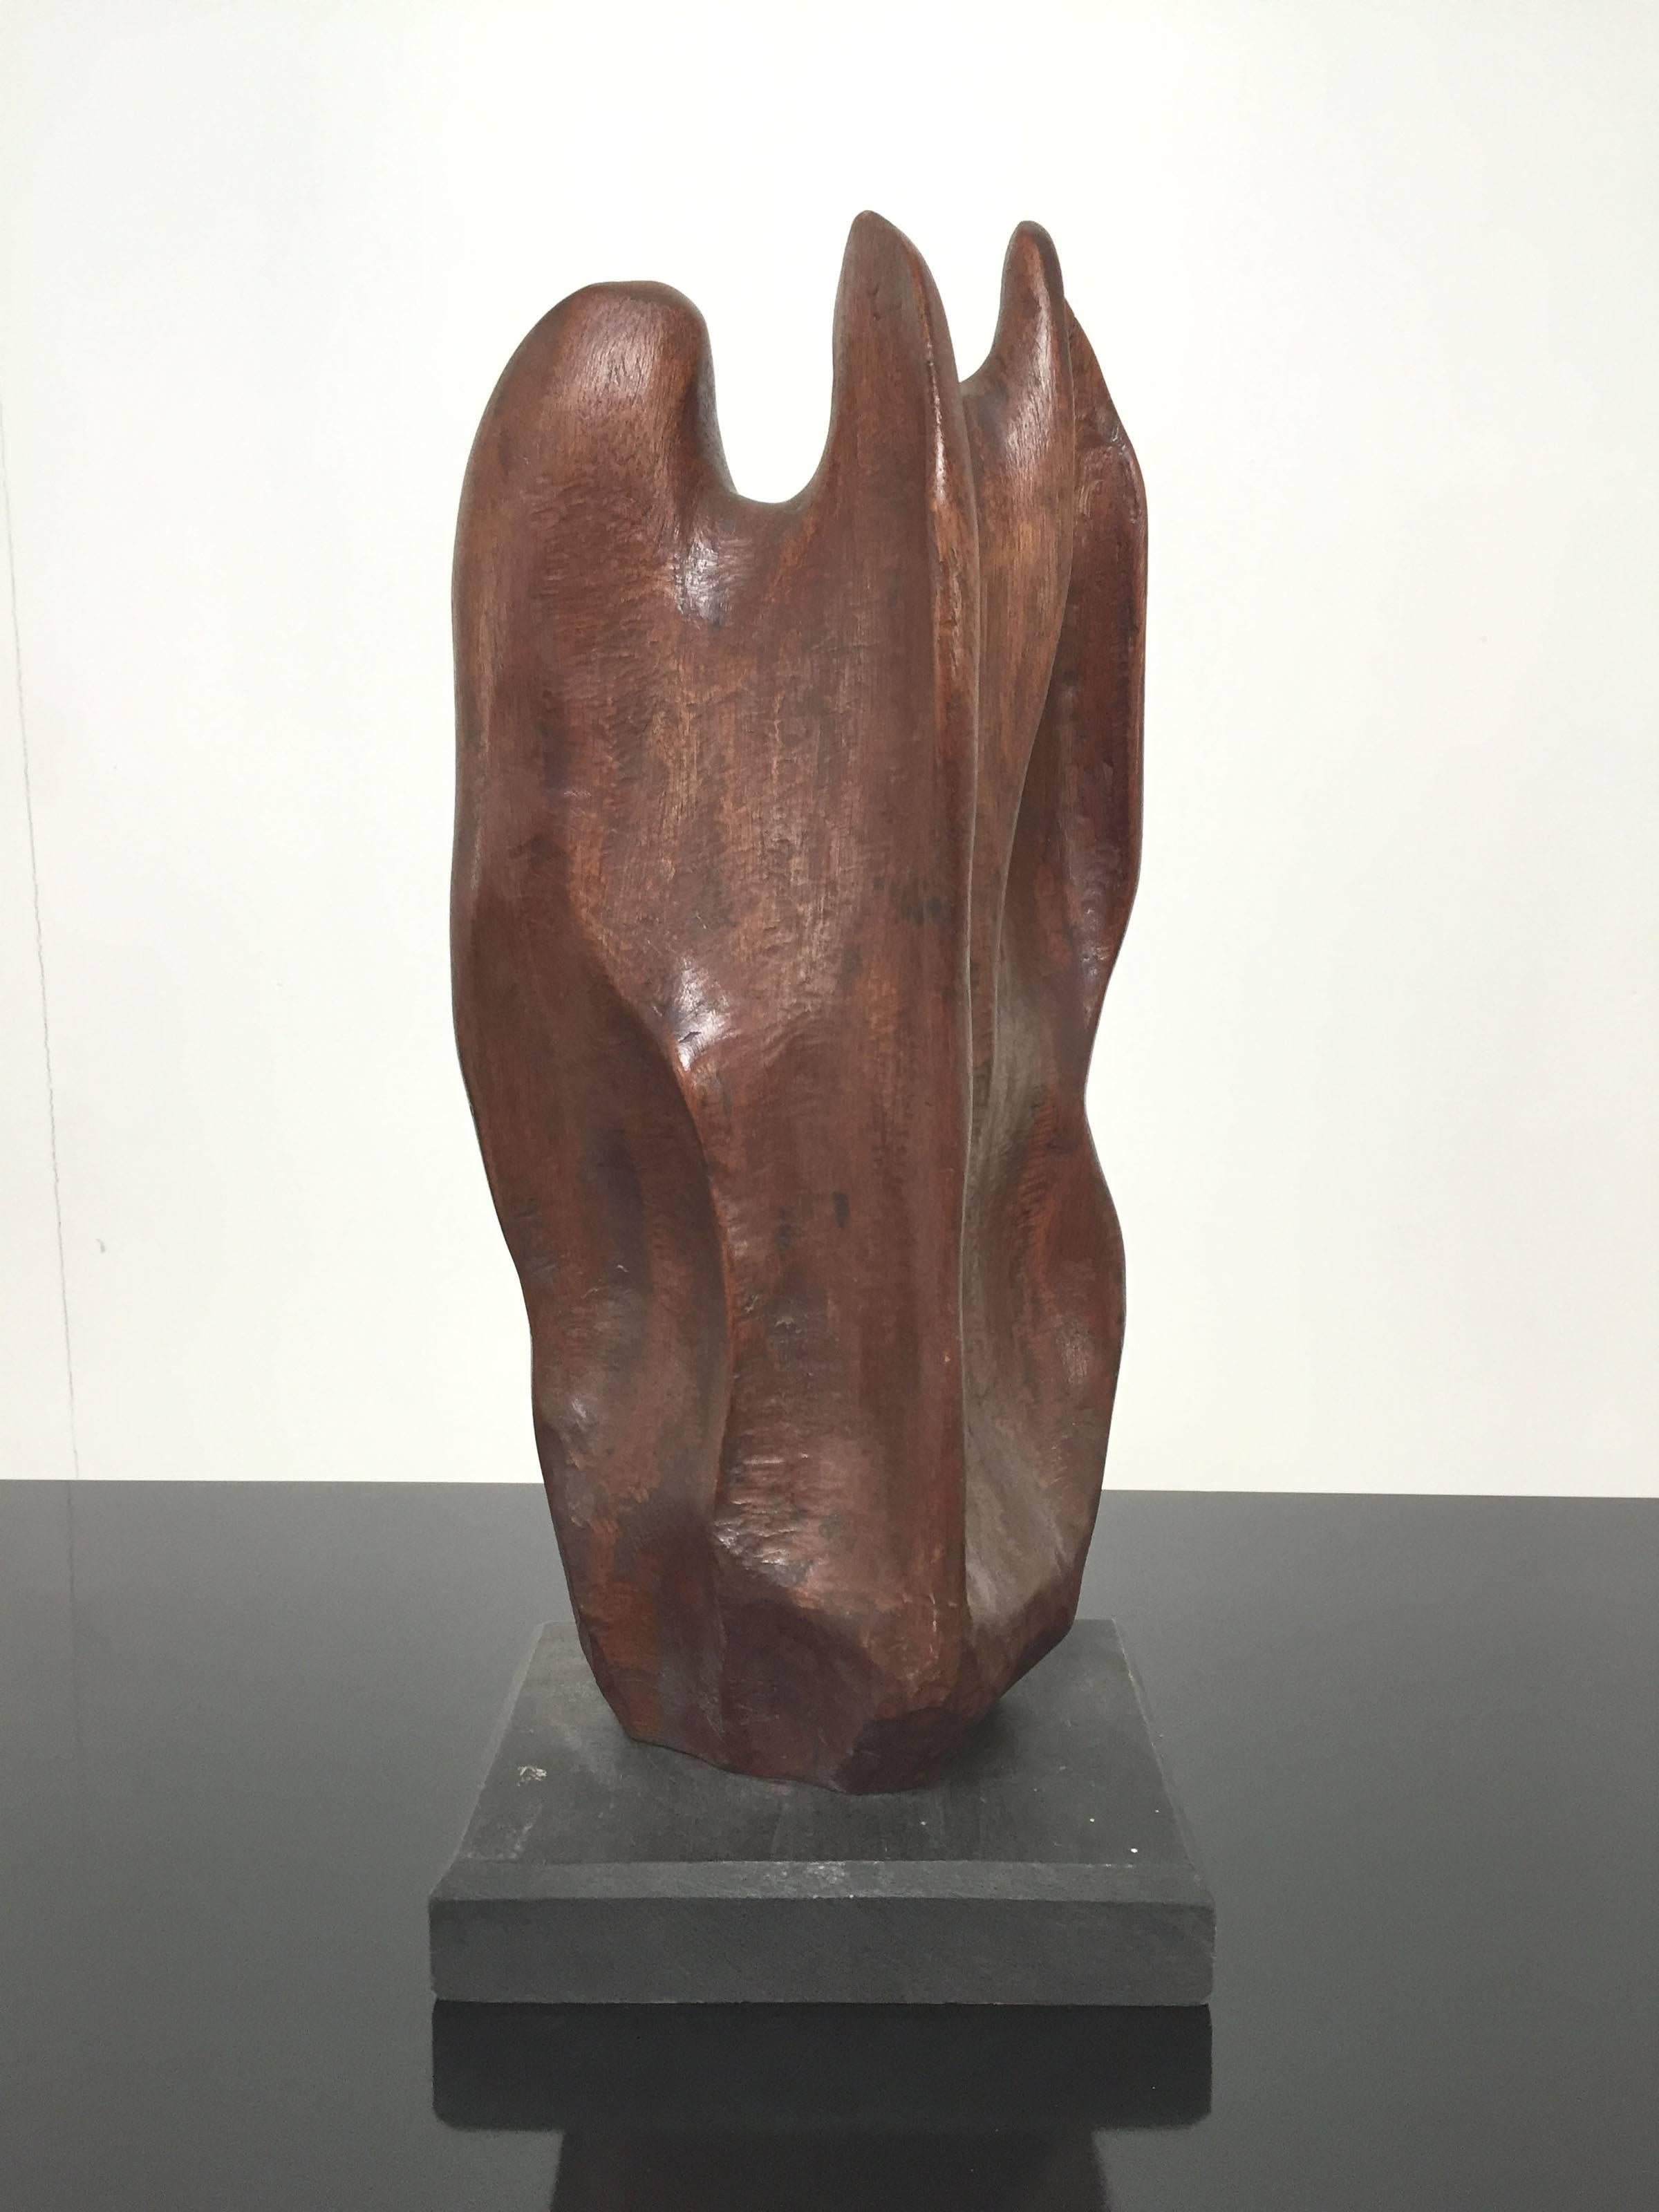 Organically abstract hand-carved wood sculpture titled 